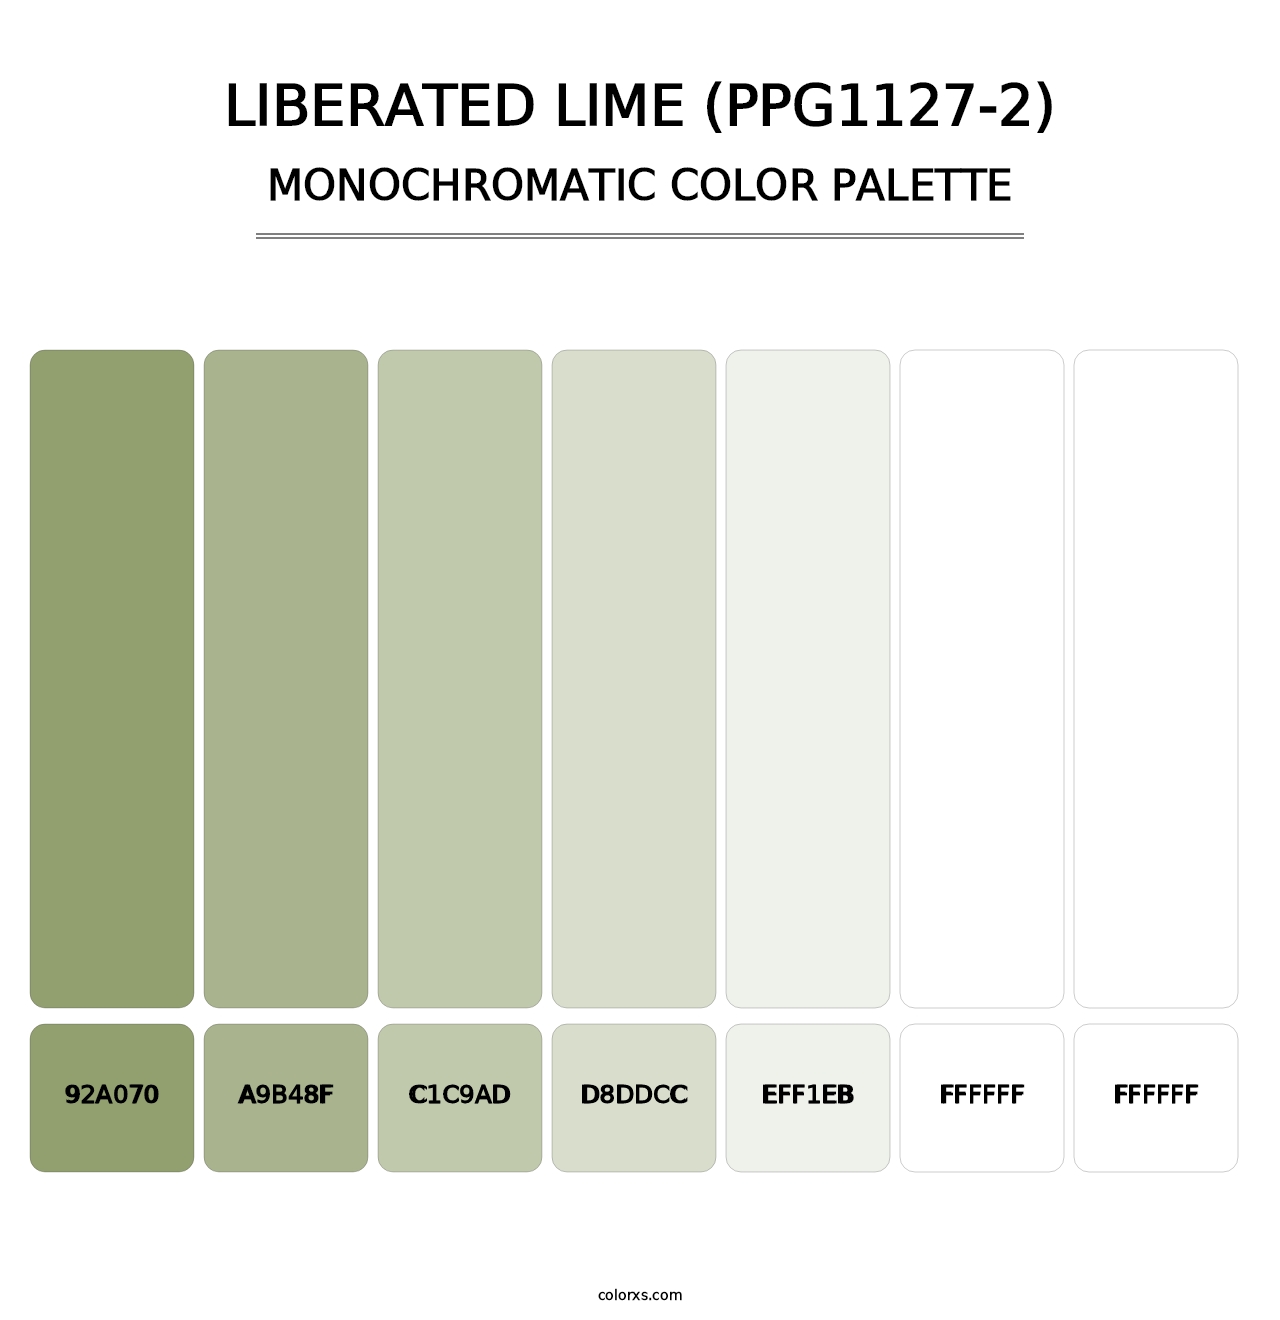 Liberated Lime (PPG1127-2) - Monochromatic Color Palette